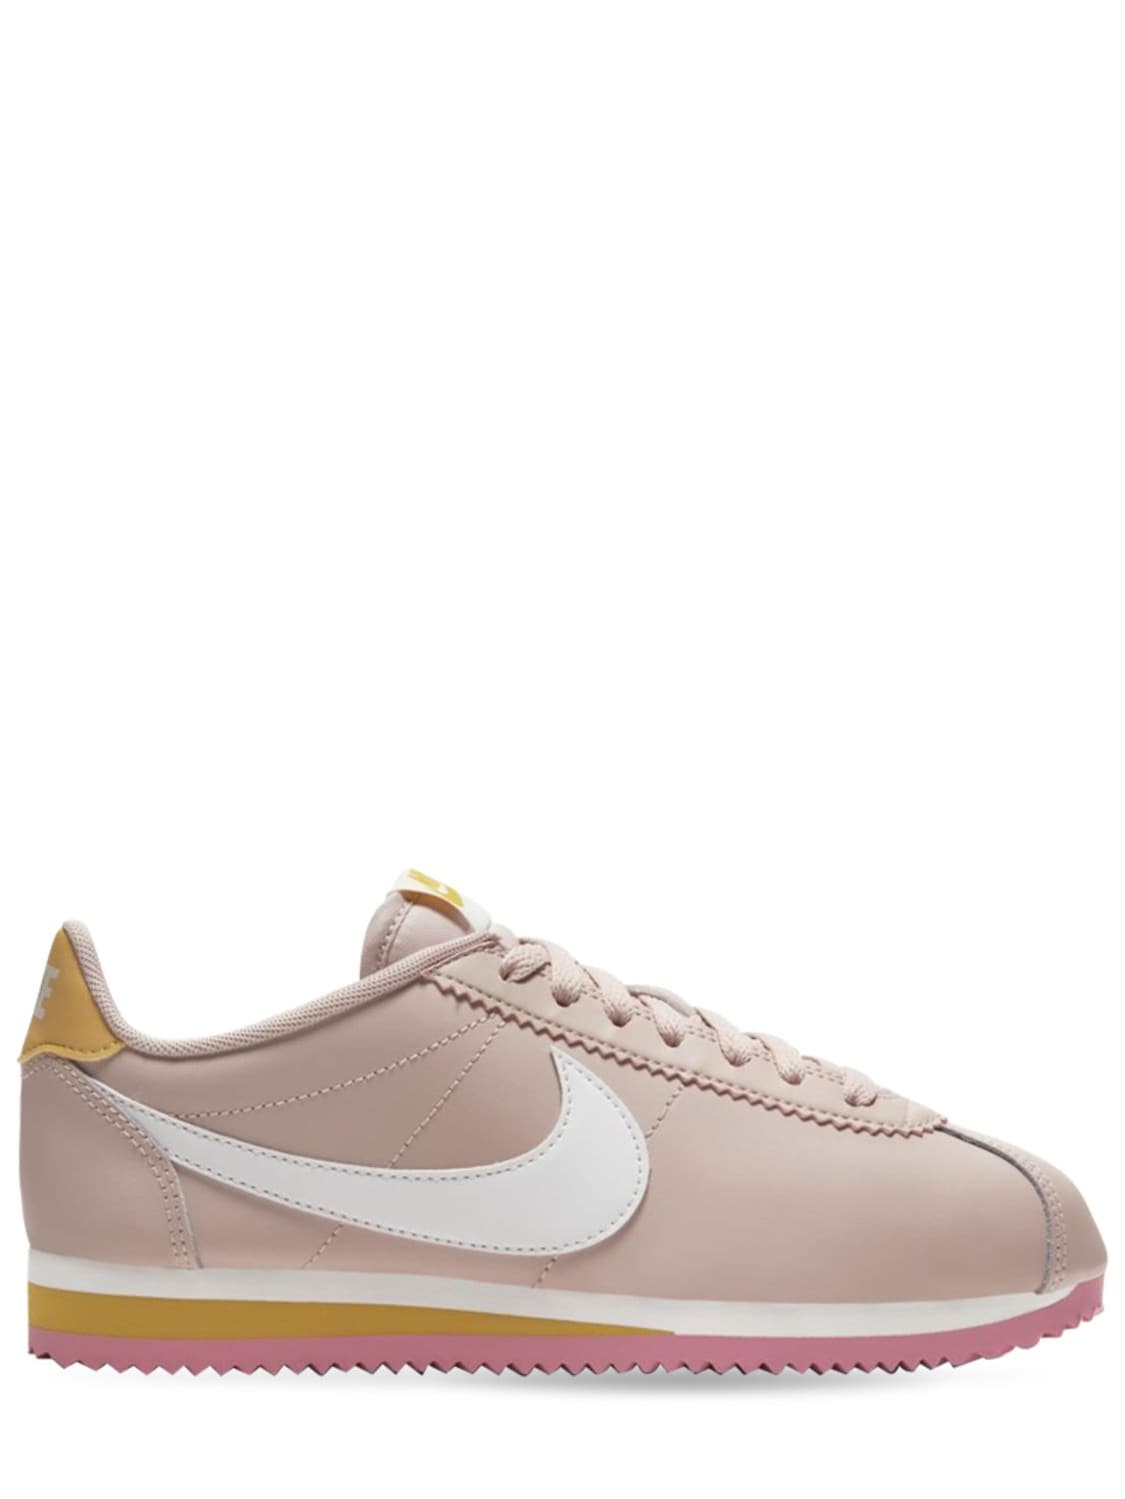 nike classic cortez pink and yellow